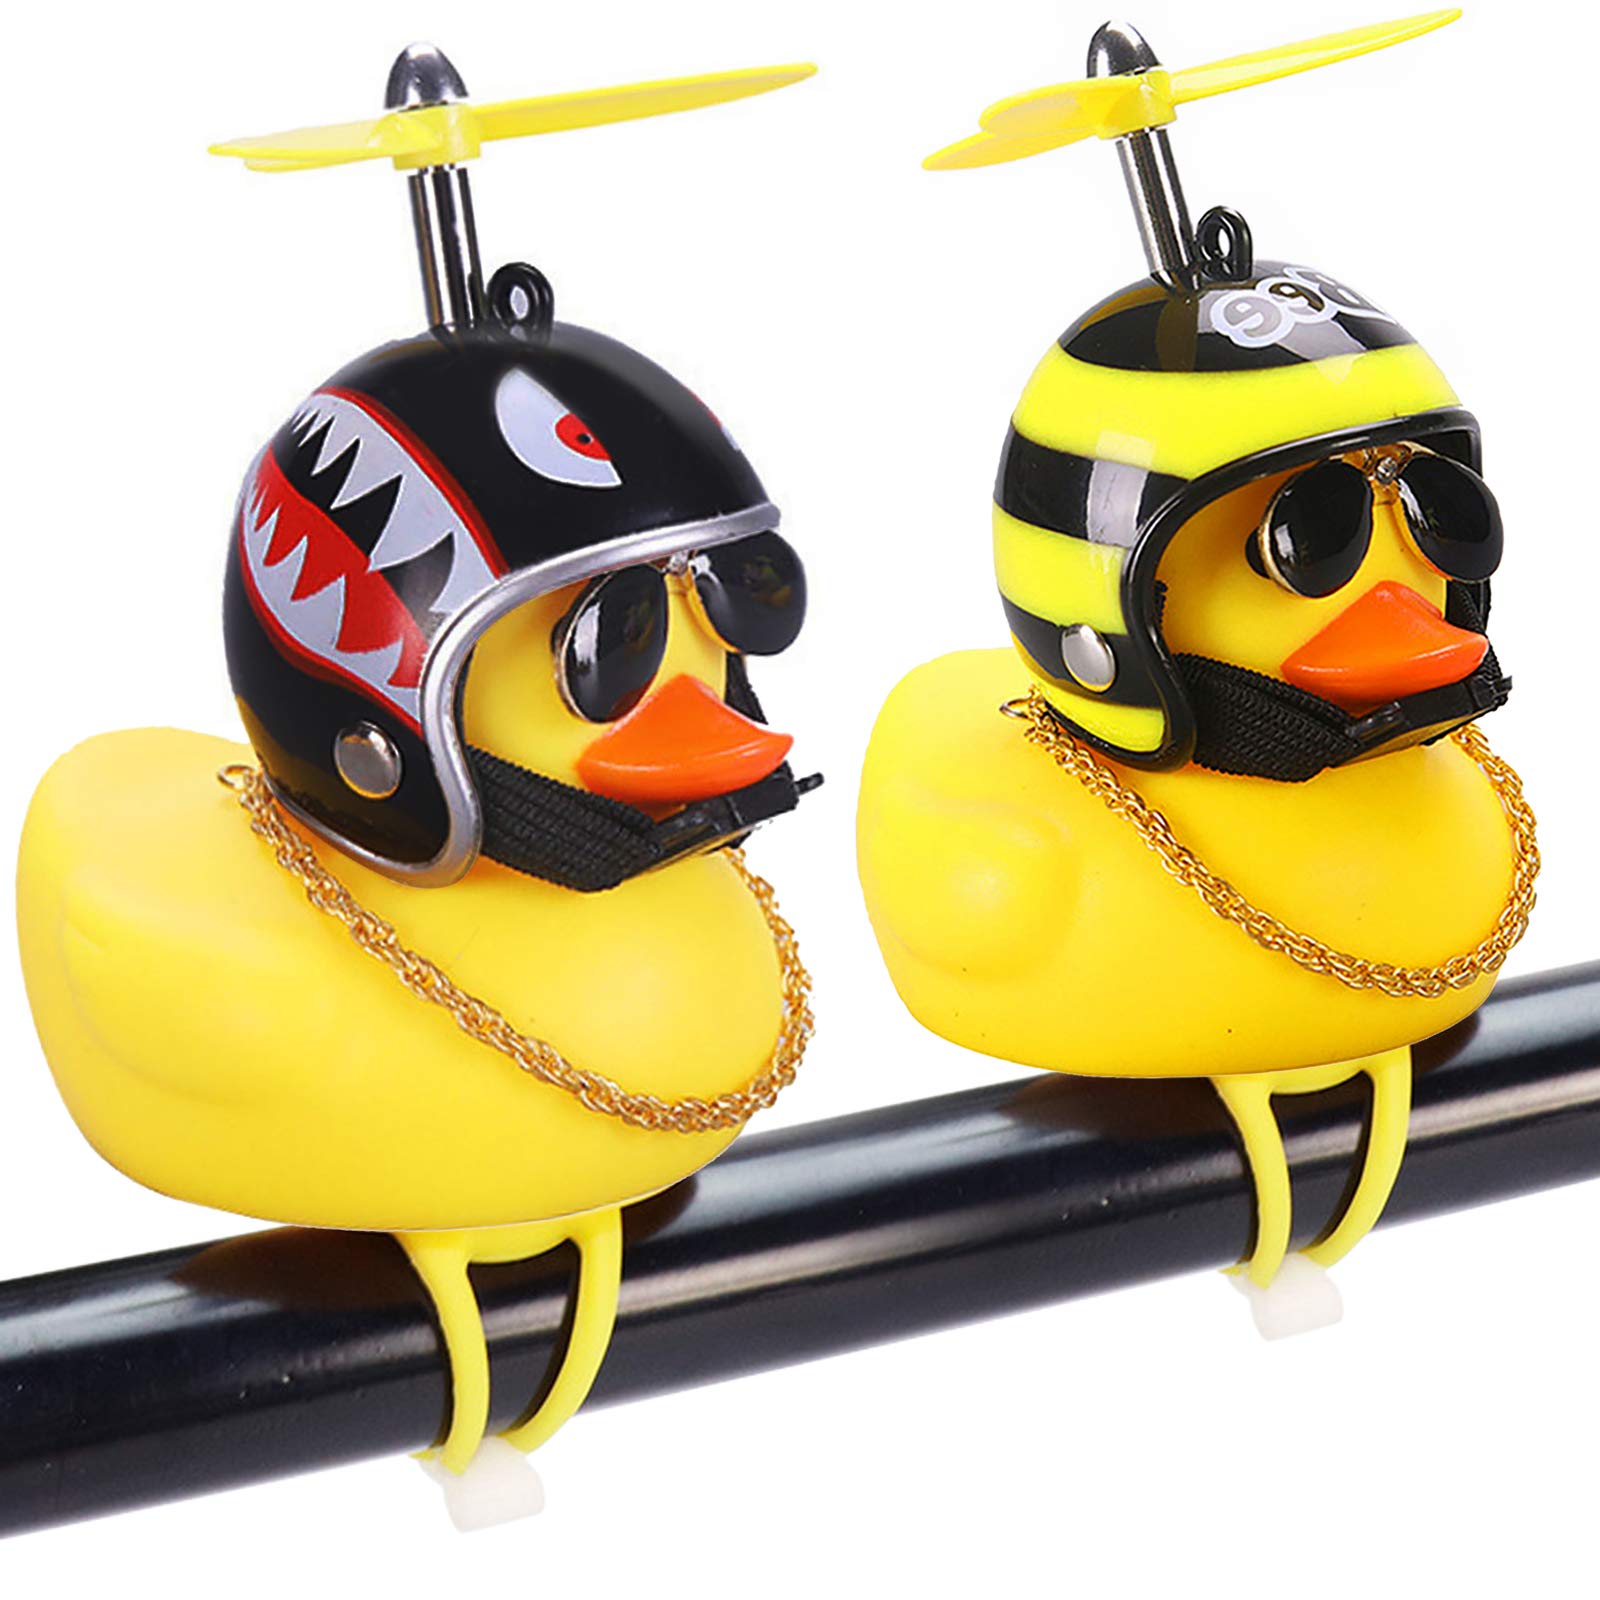 Rubber Duck Toy Motorcycle Bicycle Car Ornaments Yellow Duck Car